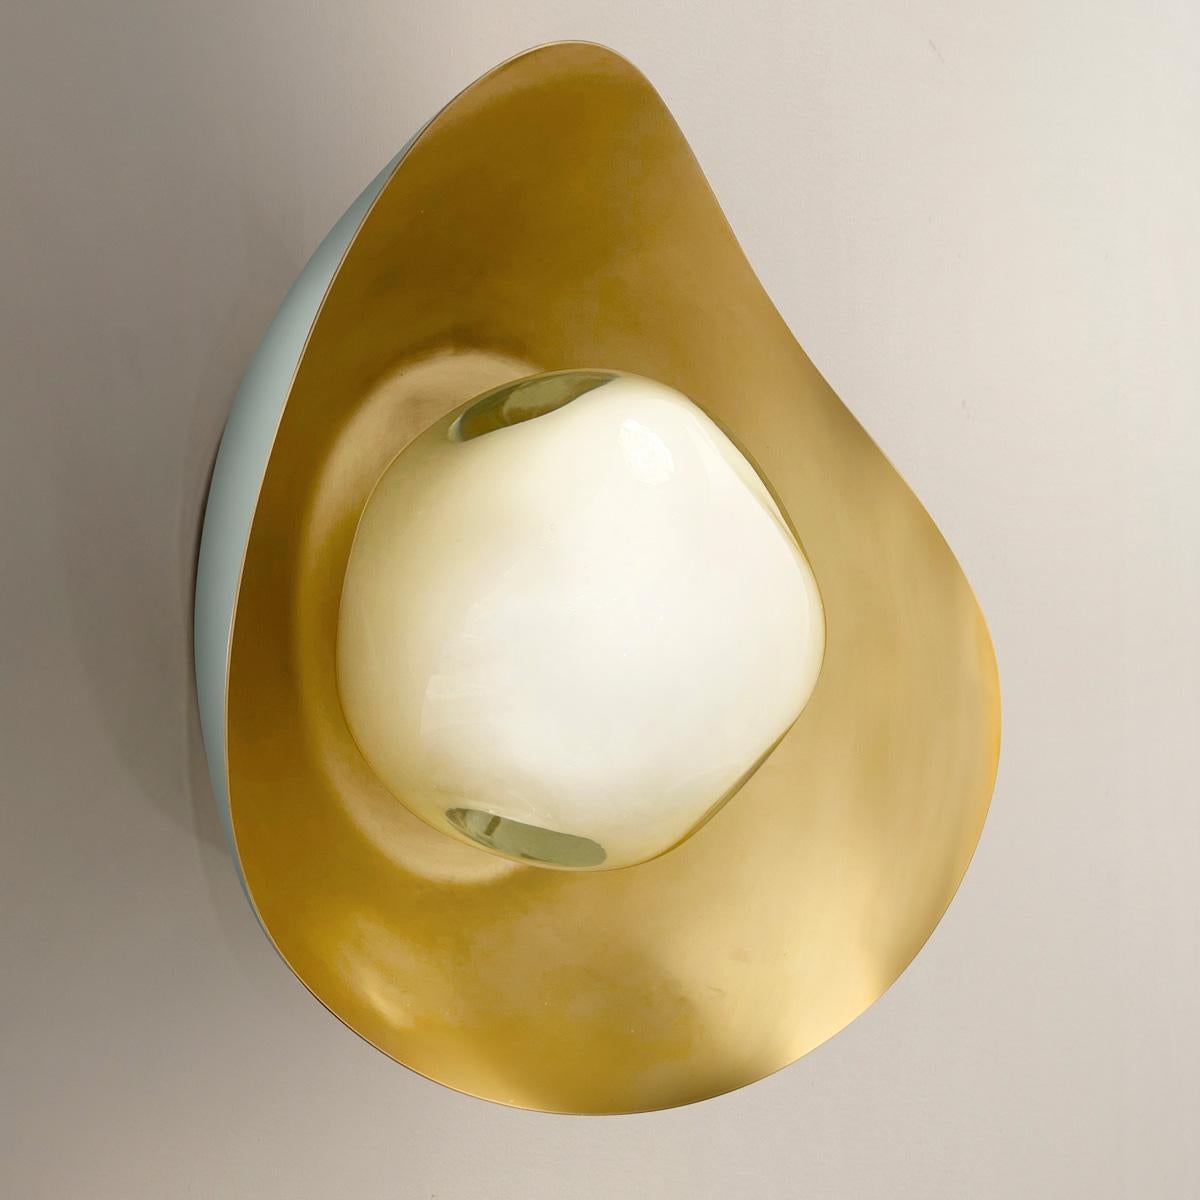 Perla Wall Light by Gaspare Asaro-Satin Brass/Acqua Finish In New Condition For Sale In New York, NY